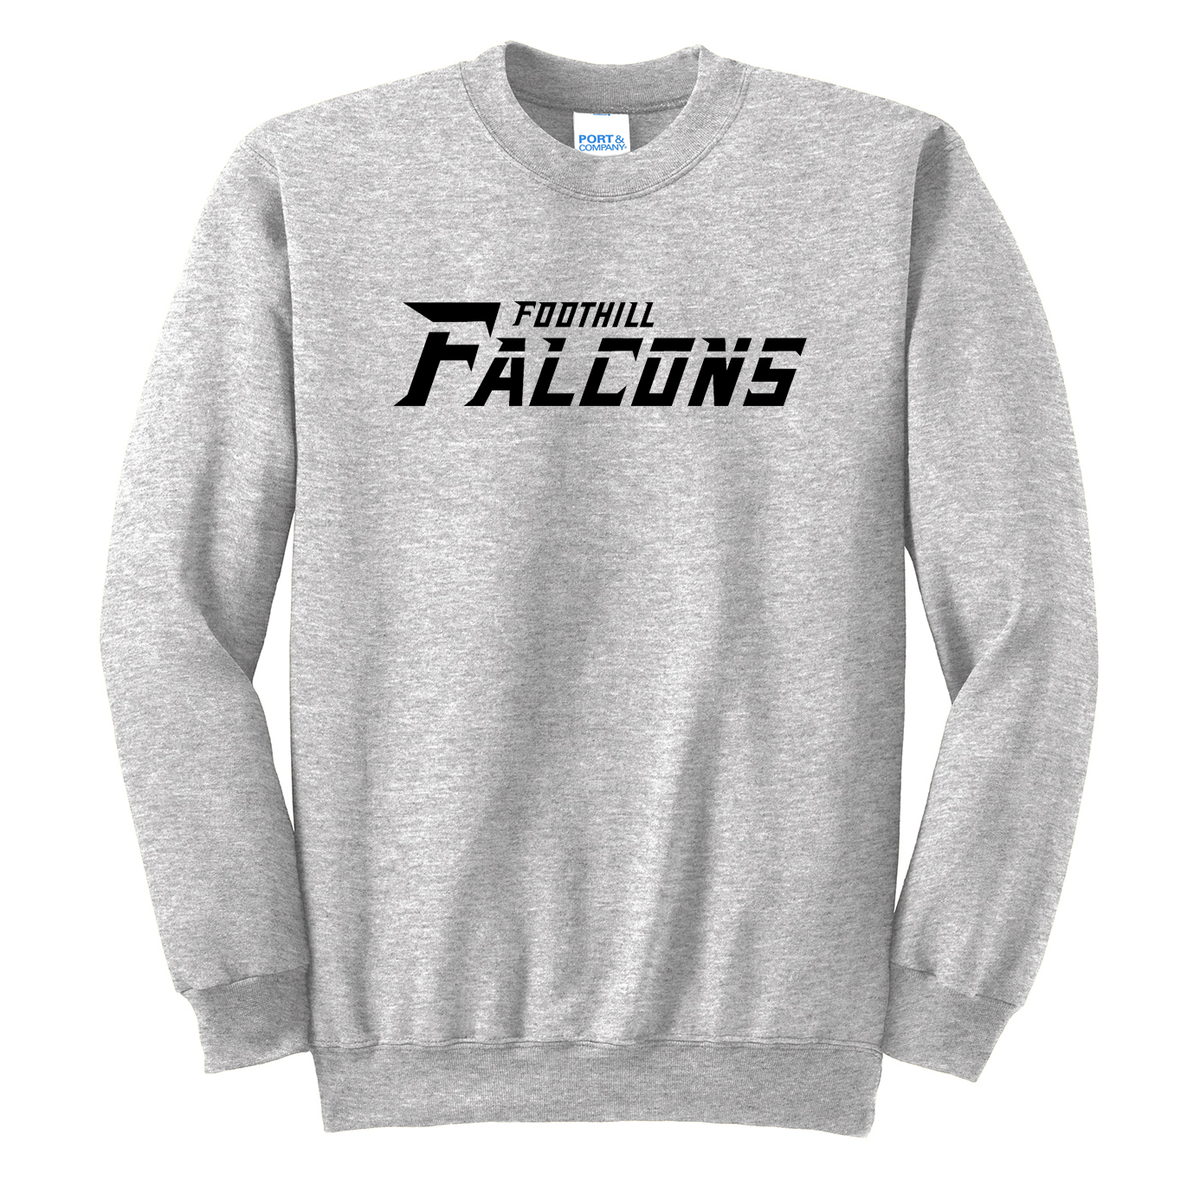 Foothill Falcons Crew Neck Sweater